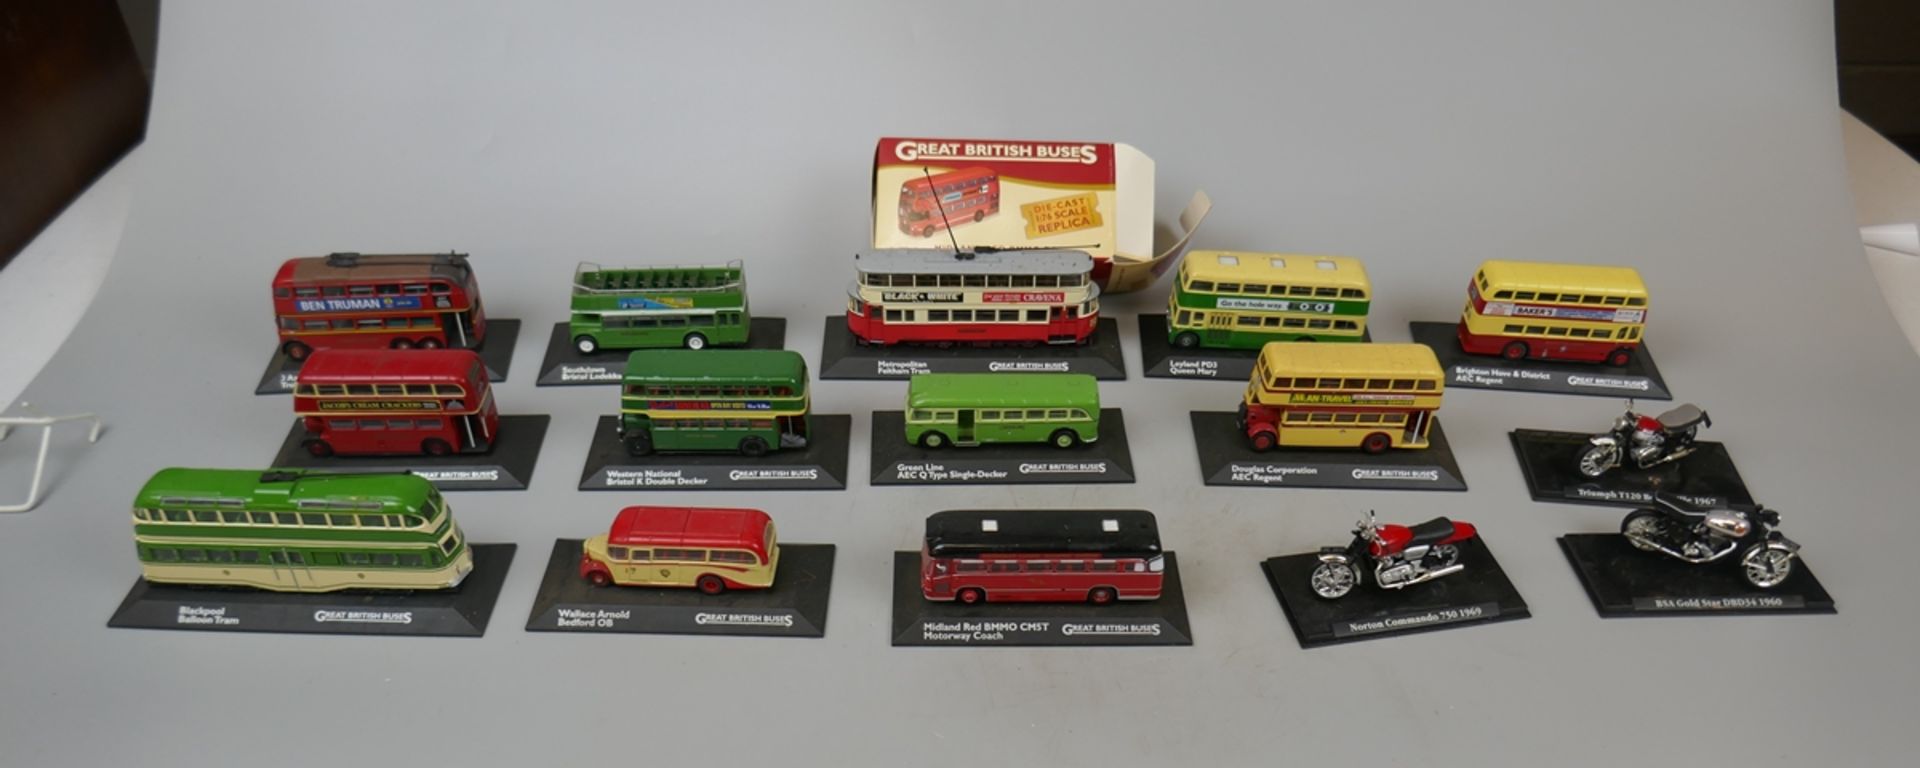 Collection of die cast trams, buses & motorcycles